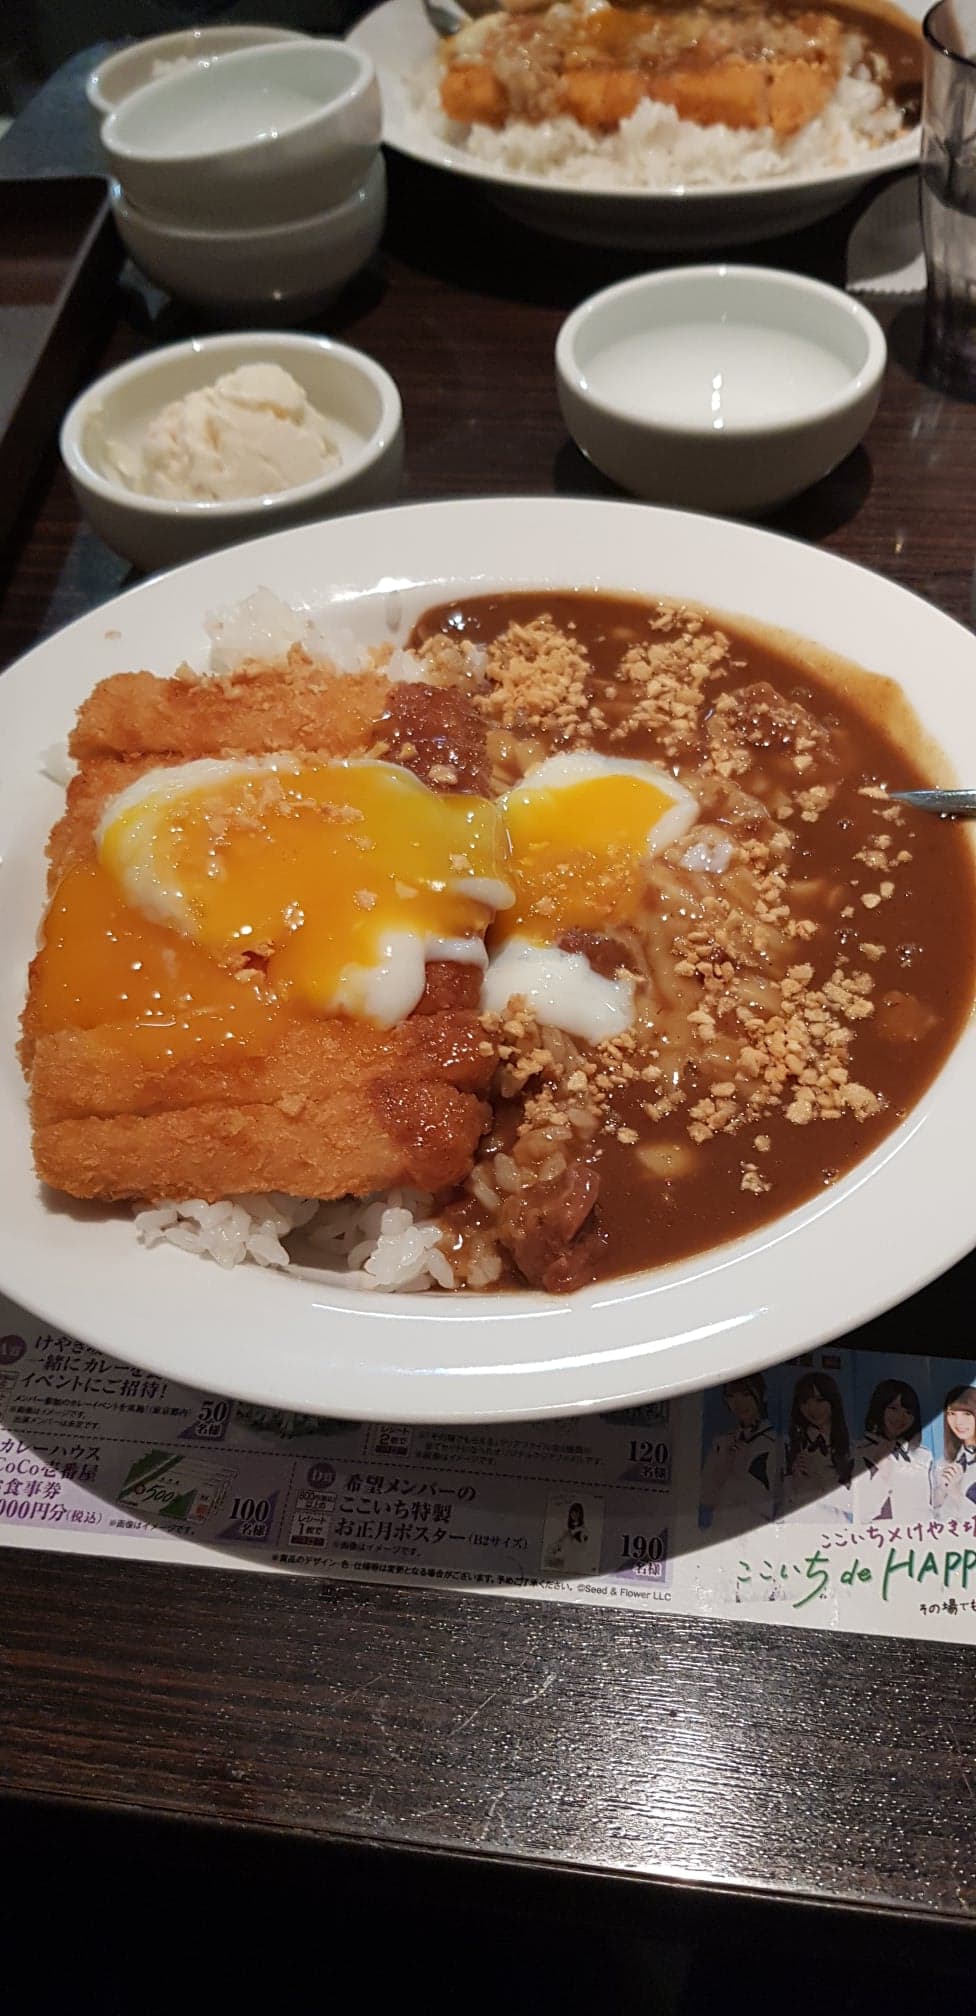 Delicious chicken katsu curry with egg and garlic topping at Coco Ichibanya.